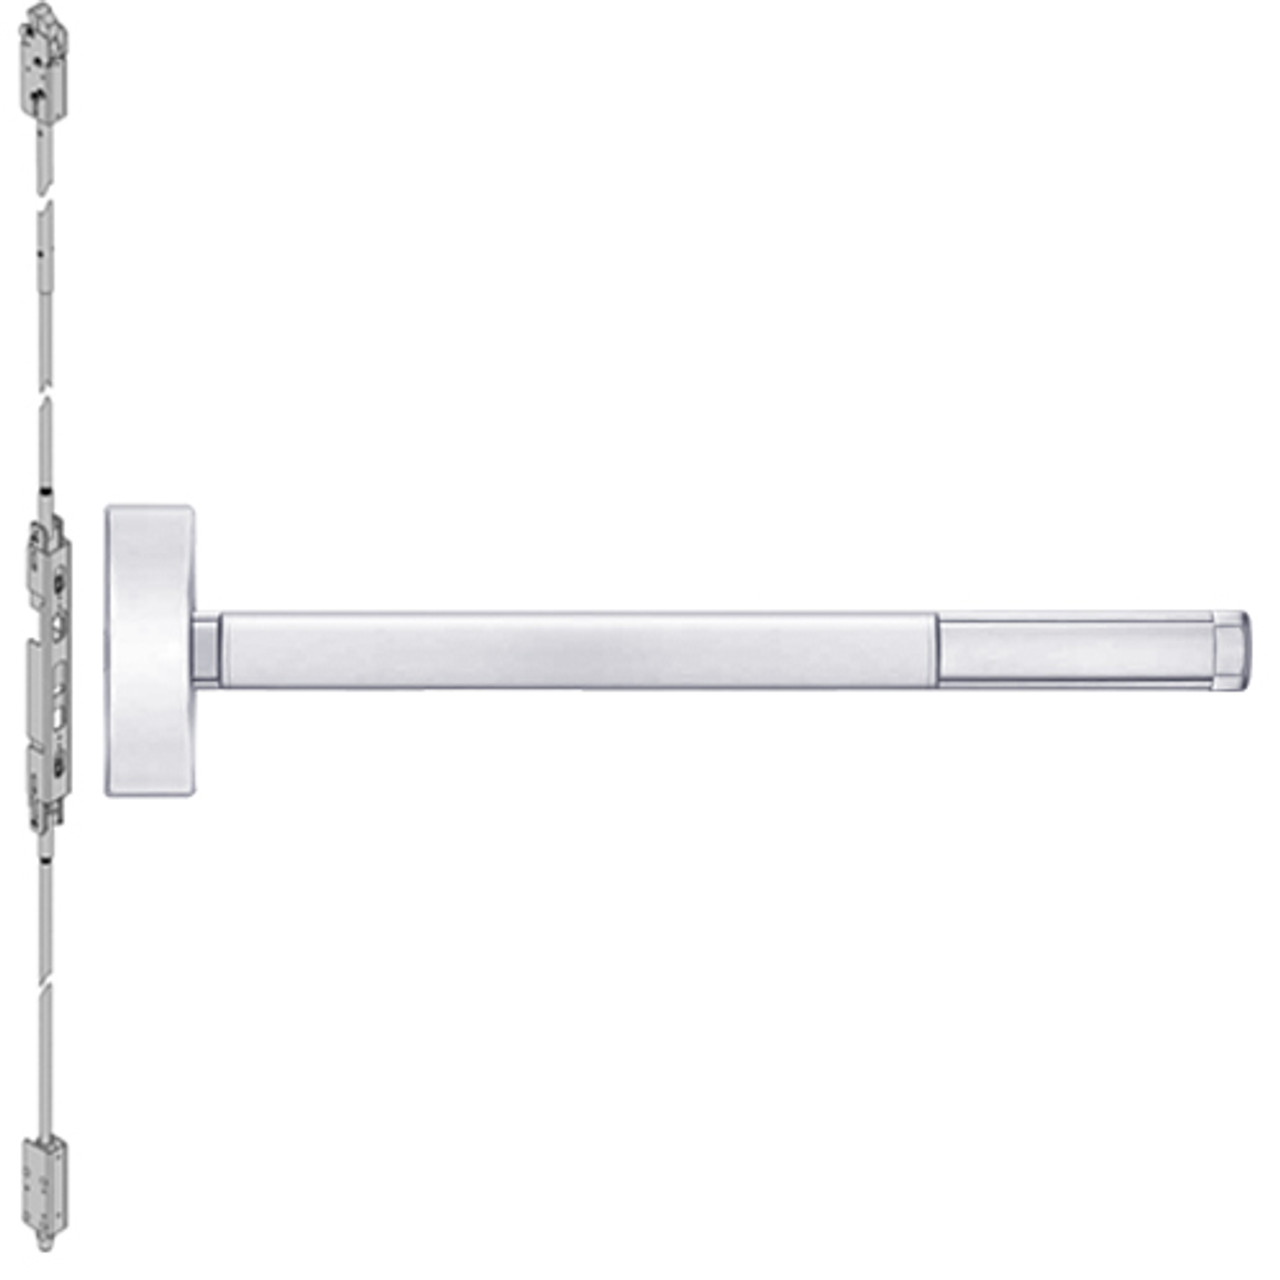 TSFL2815-625-36 PHI 2800 Series Fire Rated Concealed Vertical Rod Exit Device with Touchbar Monitoring Switch Prepped for Thumbpiece Always Active in Bright Chrome Finish